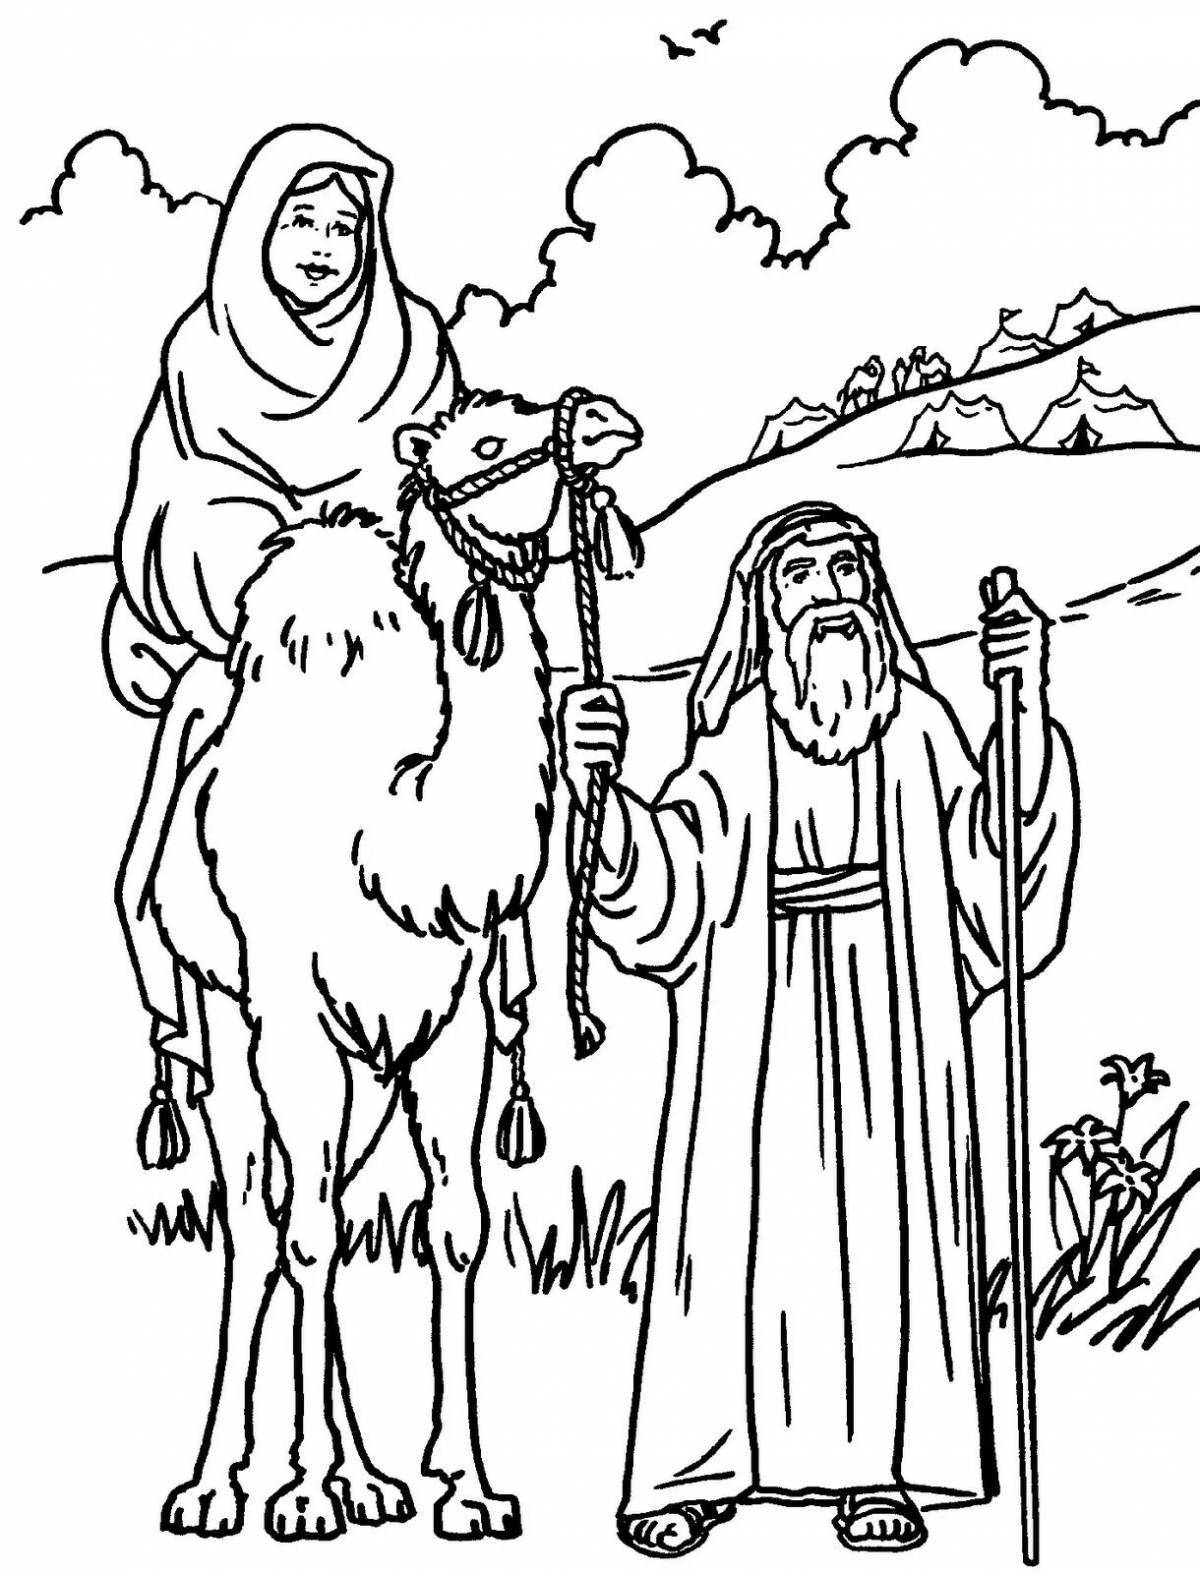 Great bible coloring book for kids